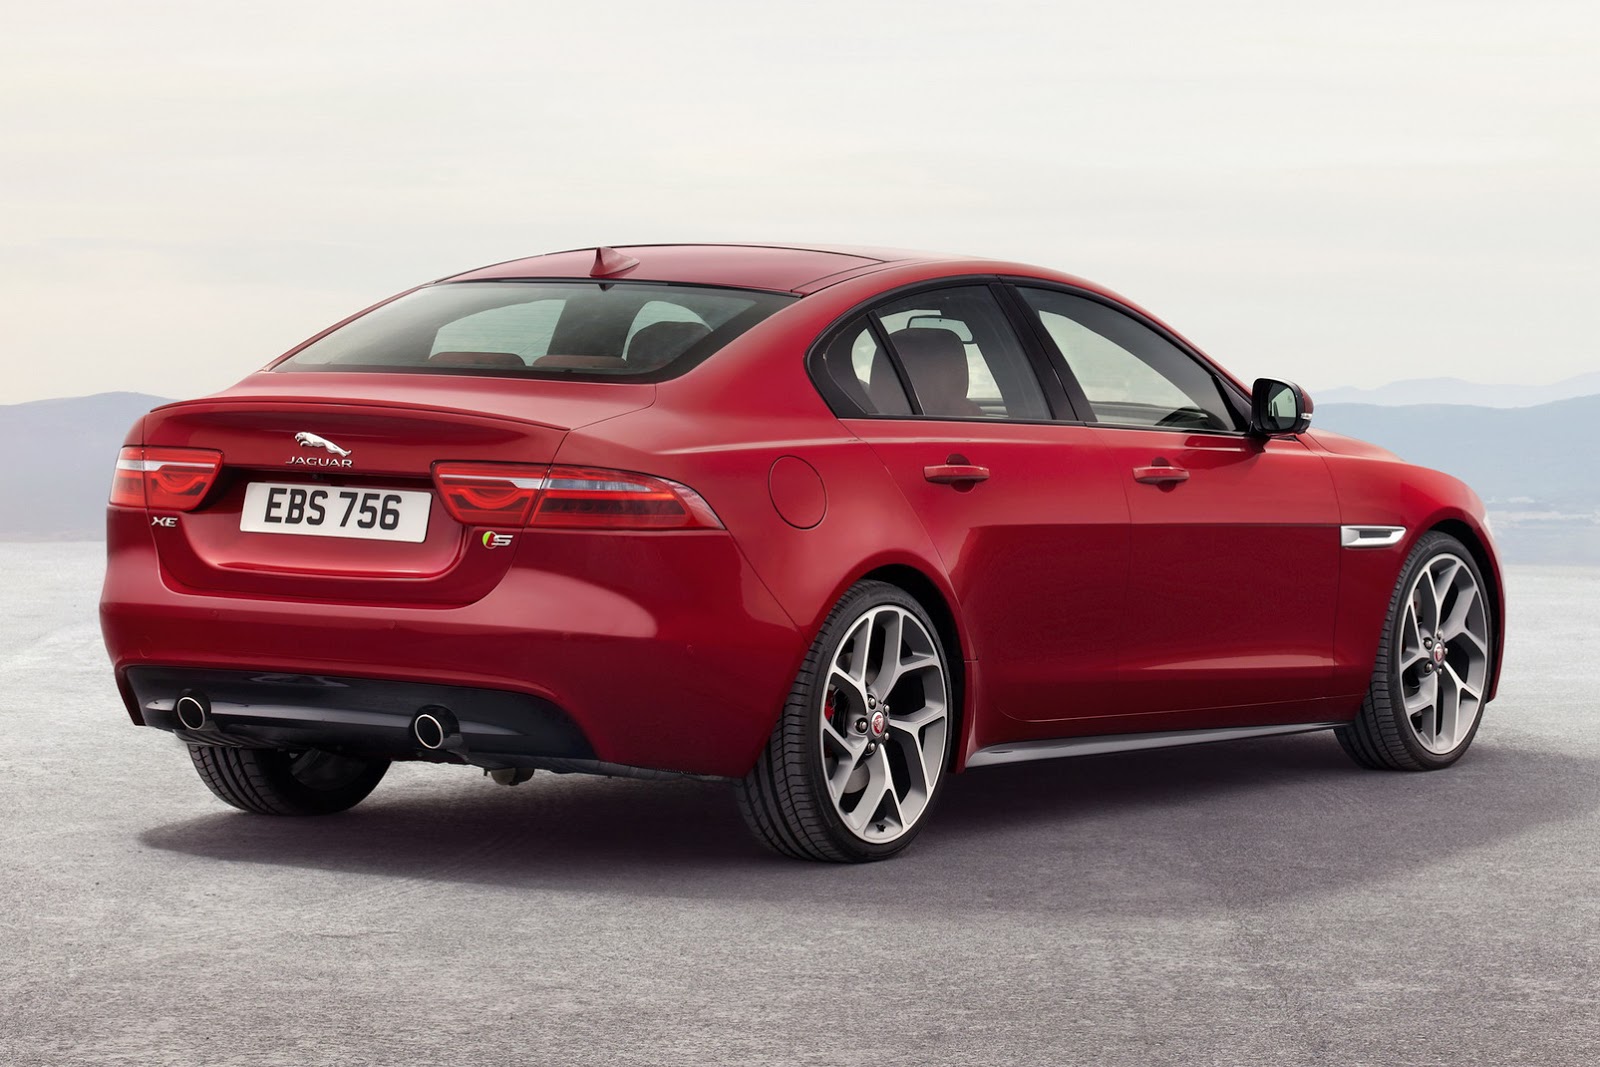 New-2016-Jaguar-XE-officially-revealed-Images-and-details-36